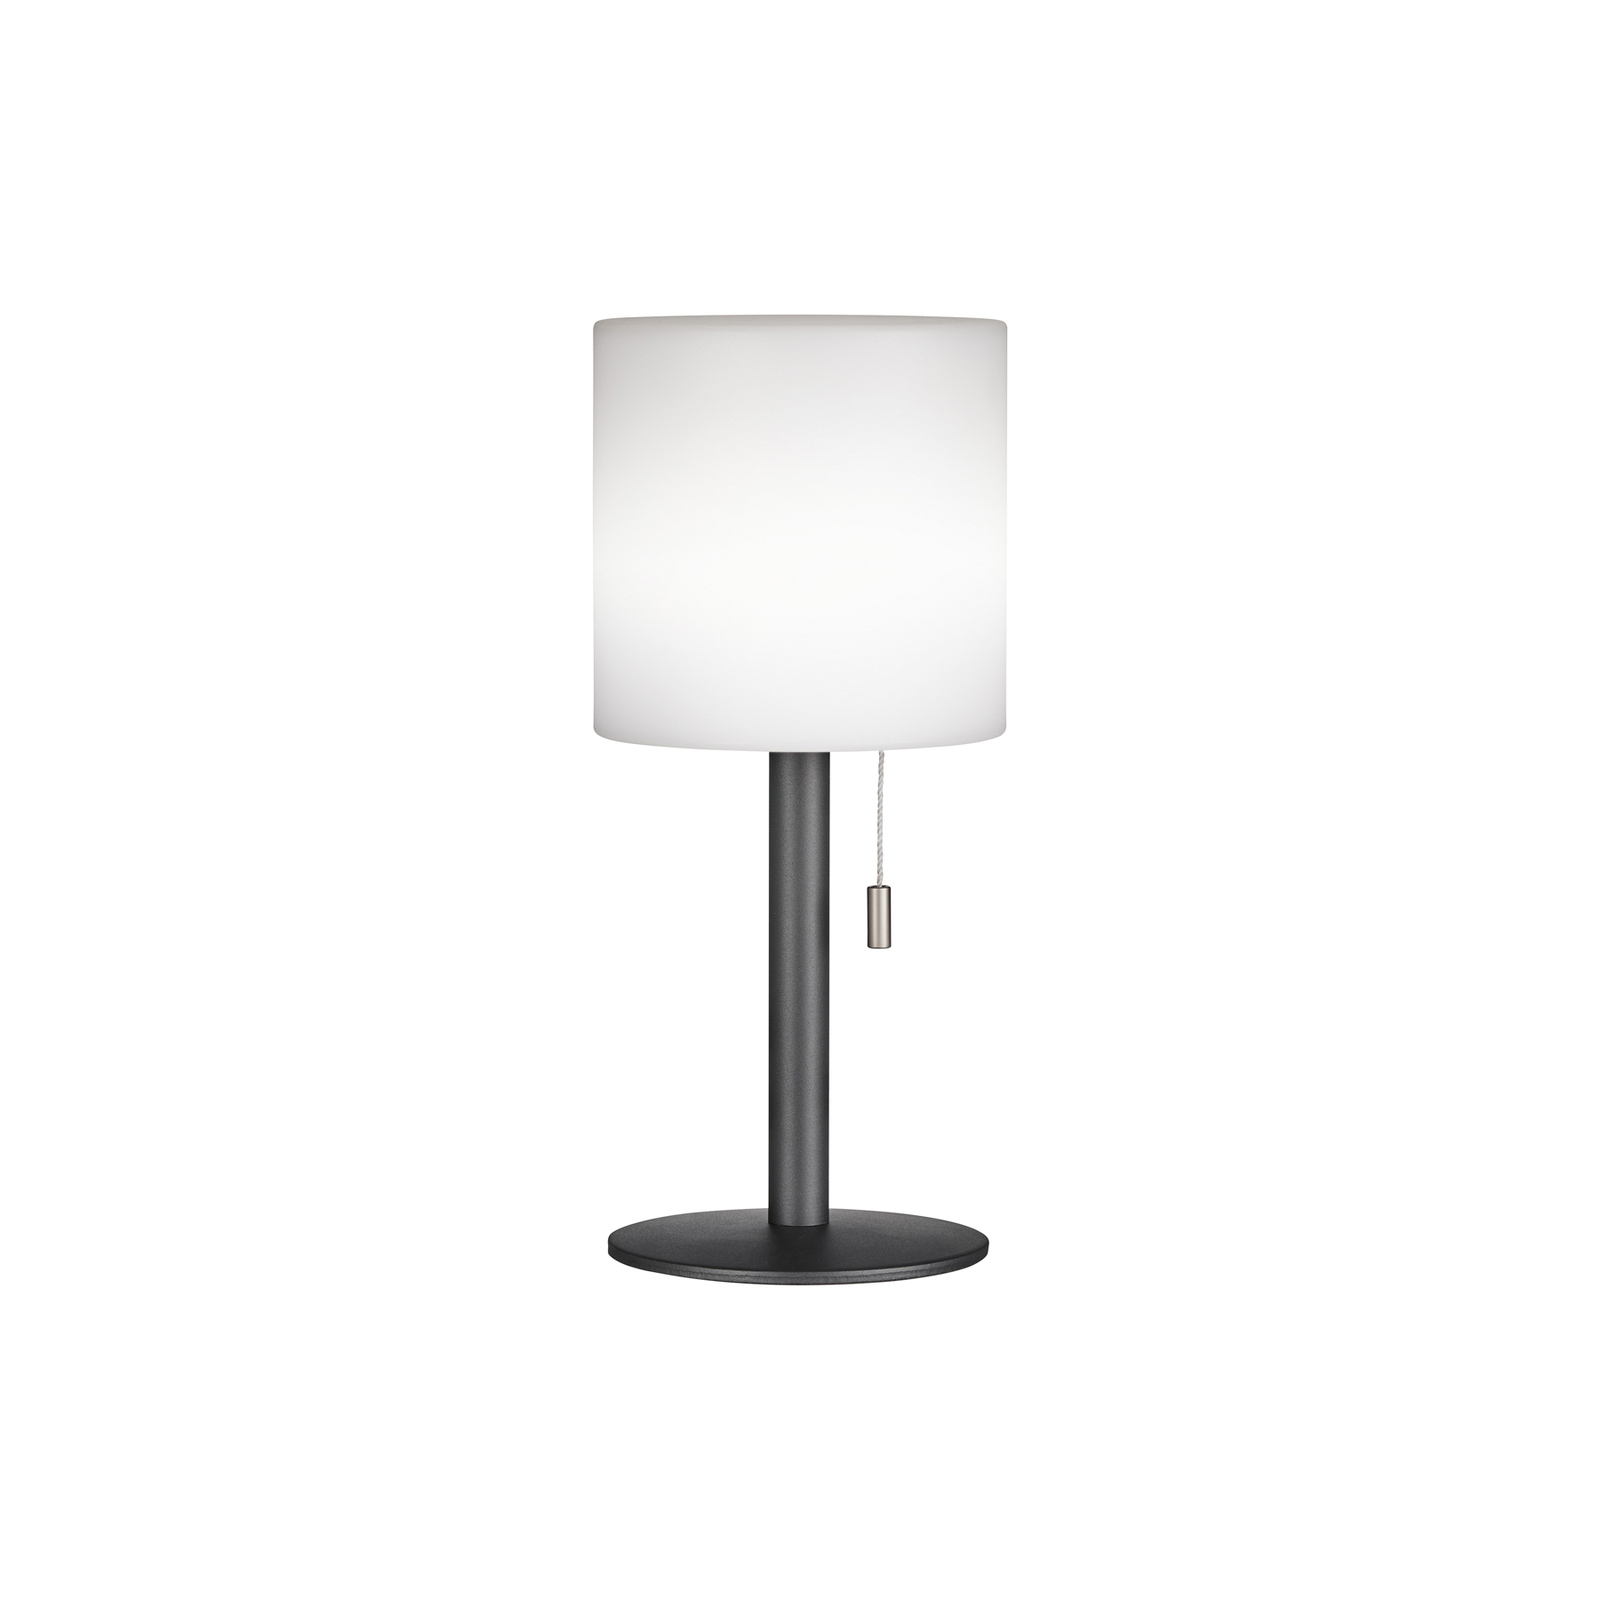 Lesina LED battery table lamp with a pull switch